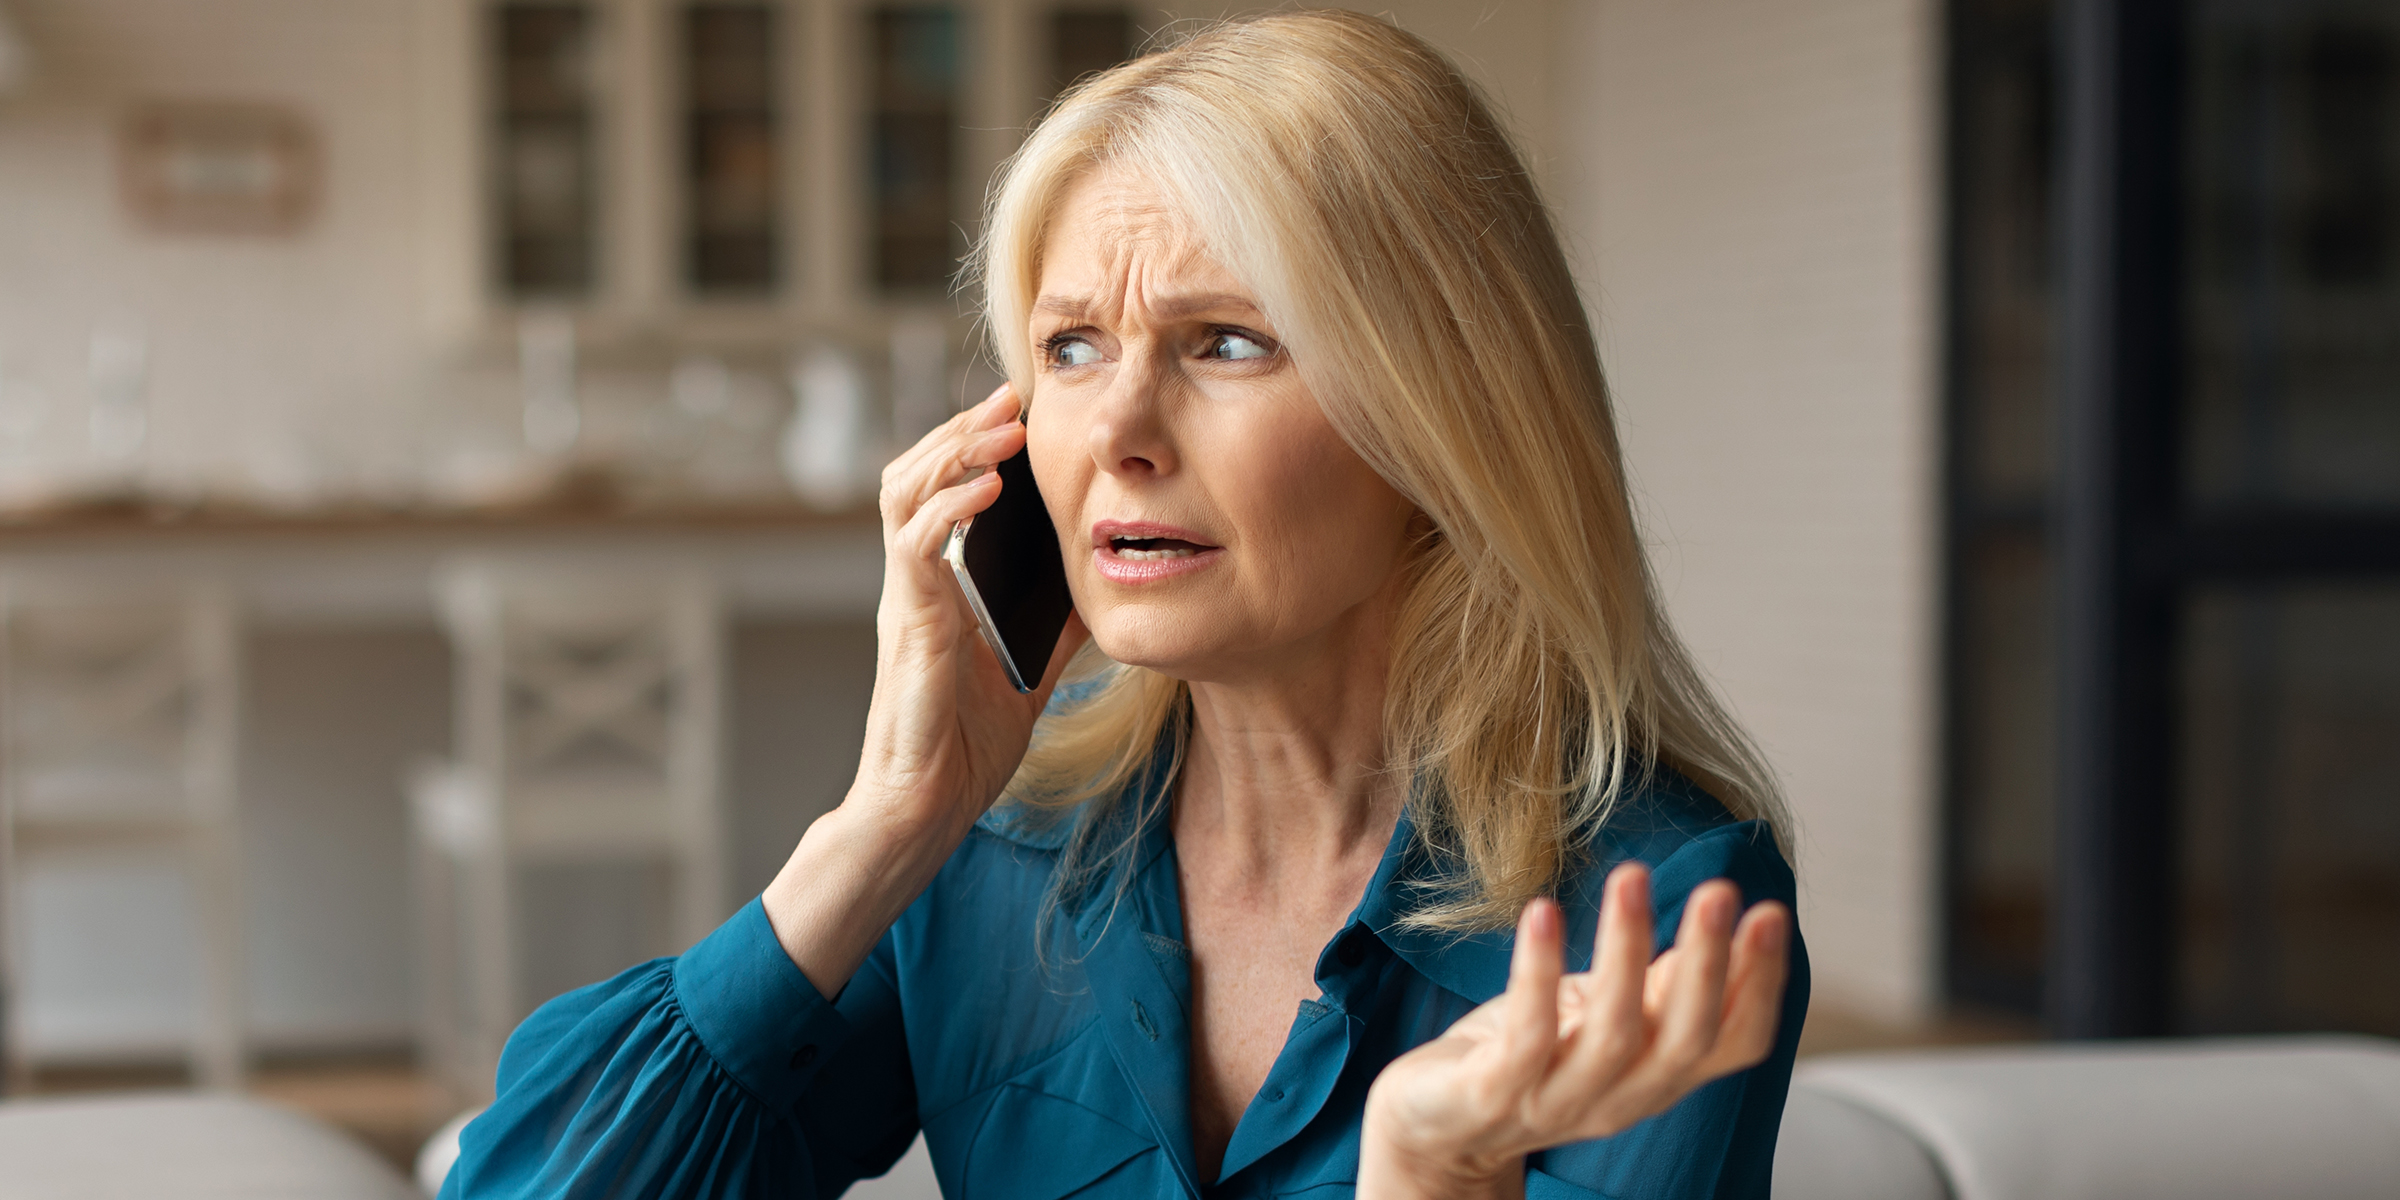 Woman talks on the phone | Source: Shutterstock